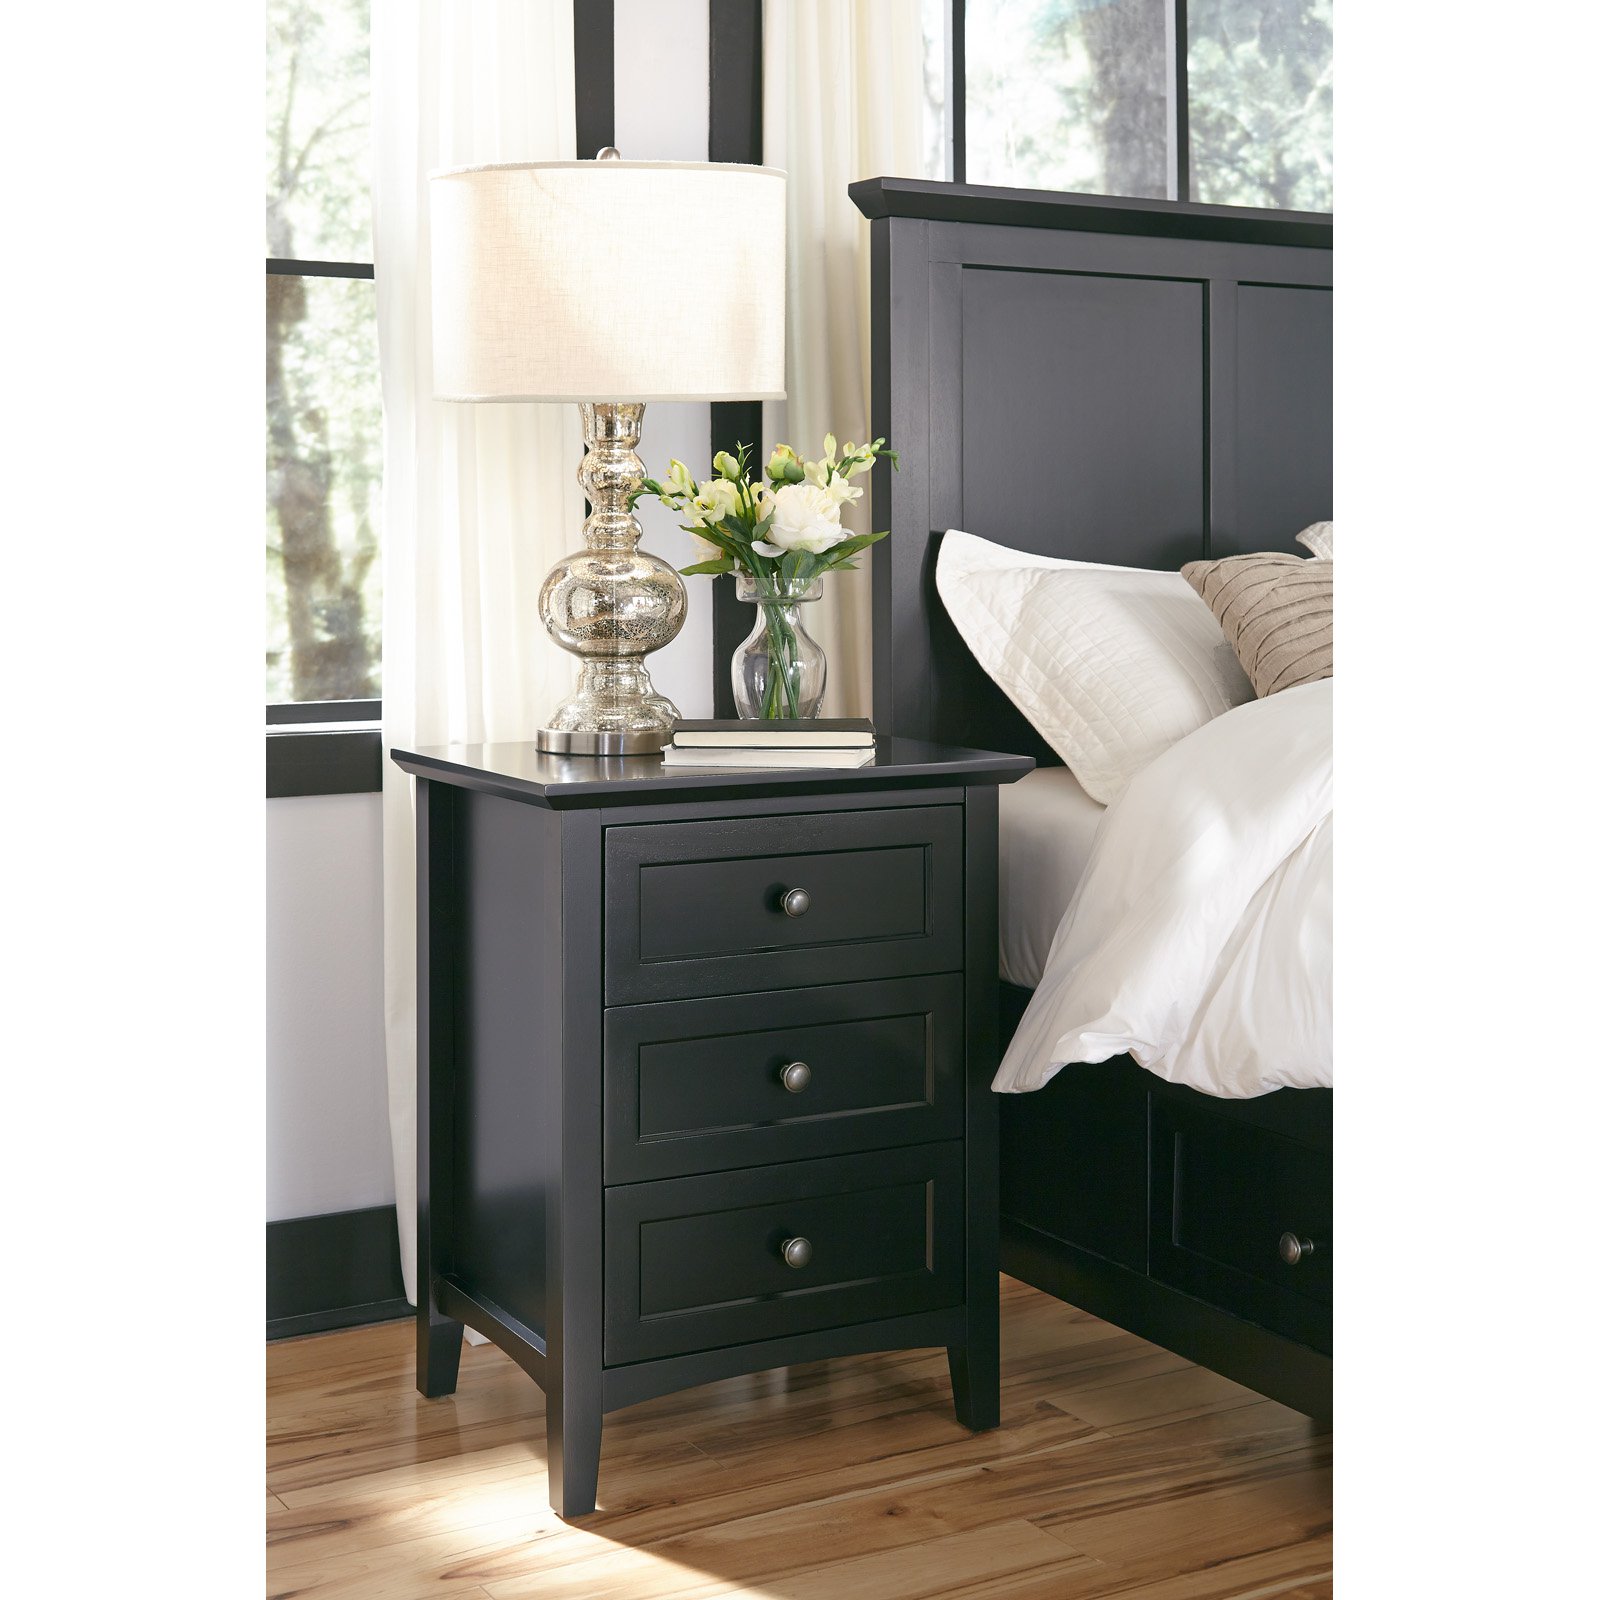 Modus Paragon 3 Drawer Nightstand in Black - image 2 of 7